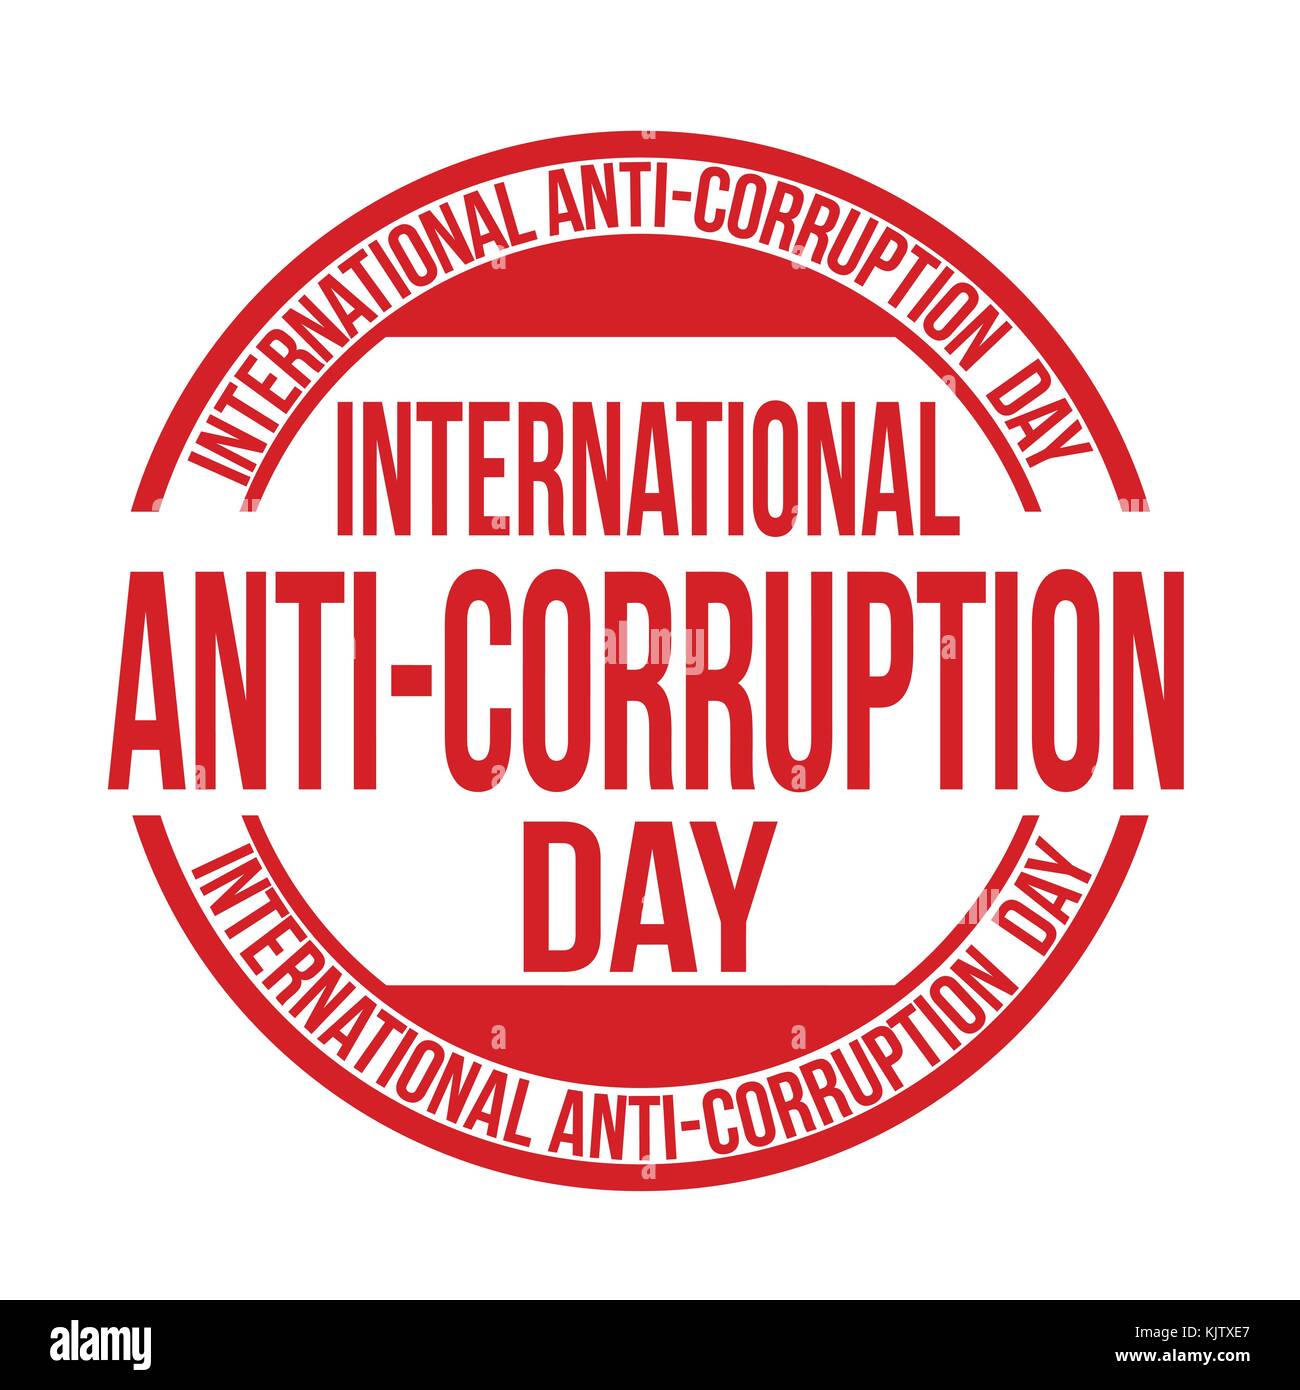 International anti-corruption day sign or stamp on white background, vector illustration Stock Vector